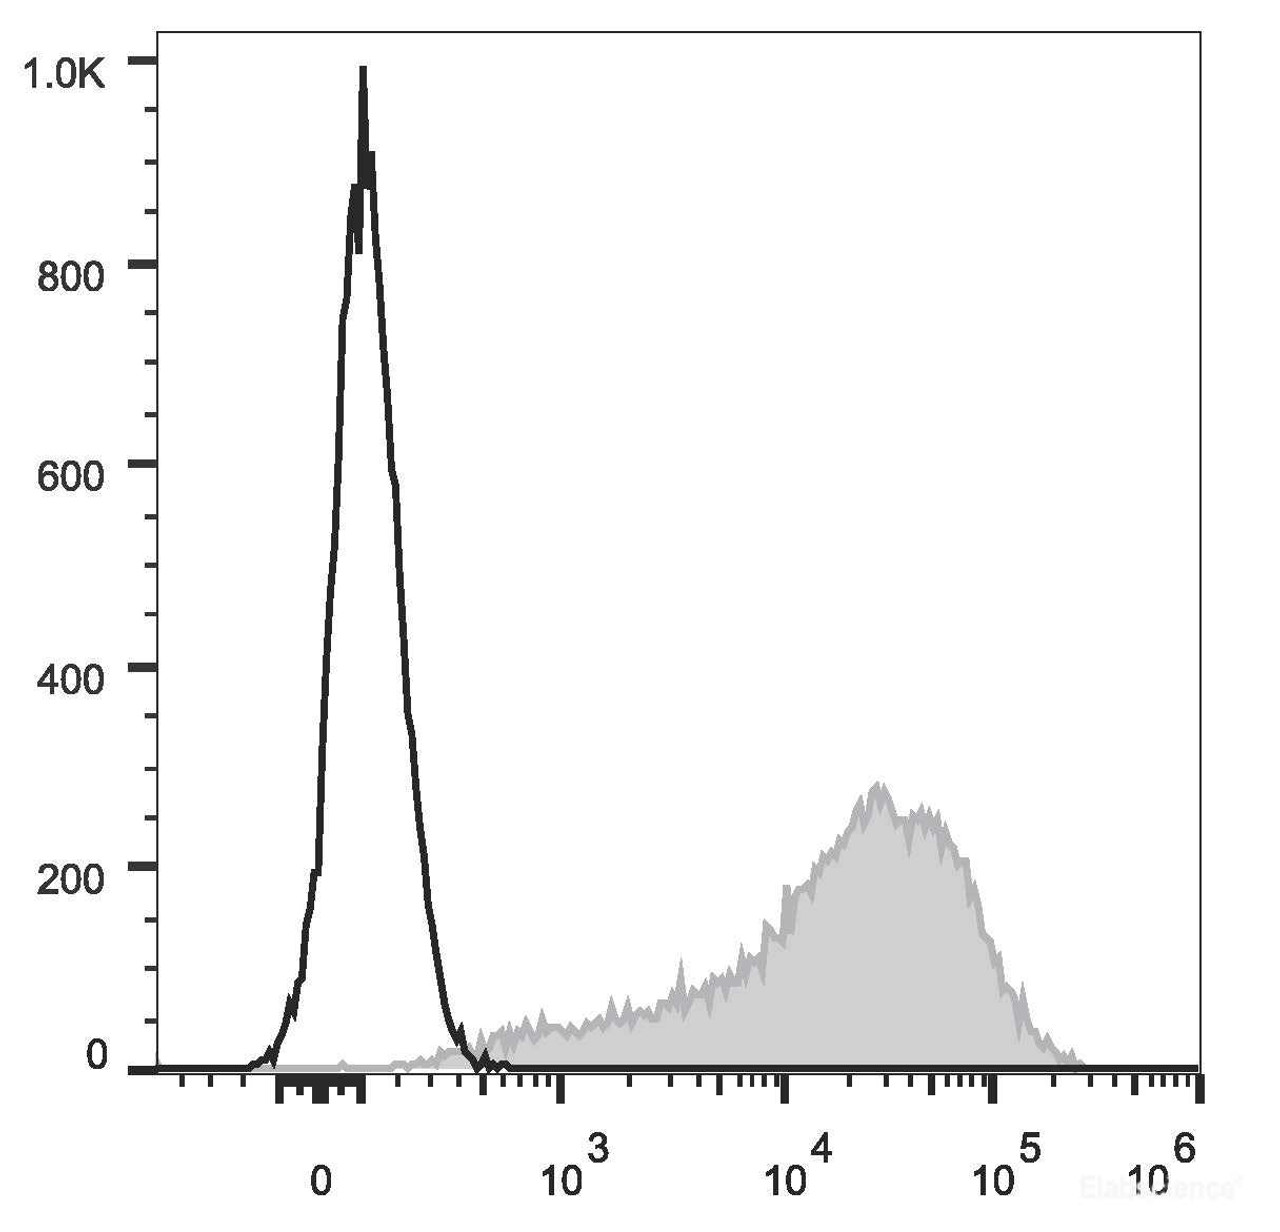 C57BL/6 murine lymphocytes are stained with PE/Cyanine7 Anti-Mouse Ly6A/E(Sca-1) Antibody[Used at .2 μg/1<sup>6</sup> cells dilution](filled gray histogram). Unstained lymphocytes(empty black histogram) are used as control.